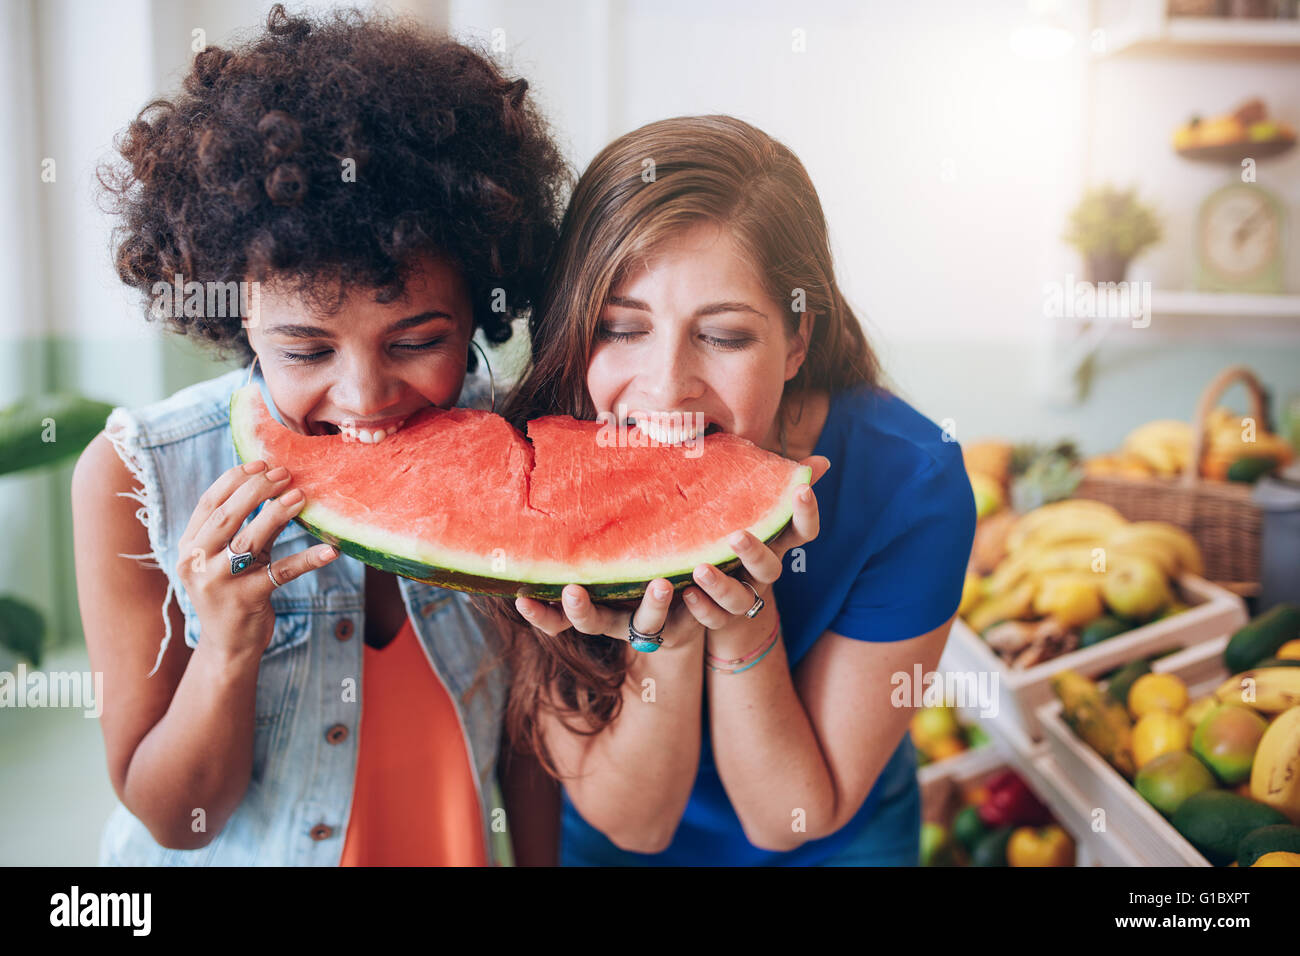 Two young woman eating watermelon and having fun. Mixed race female friends together eating a watermelon slice. Stock Photo